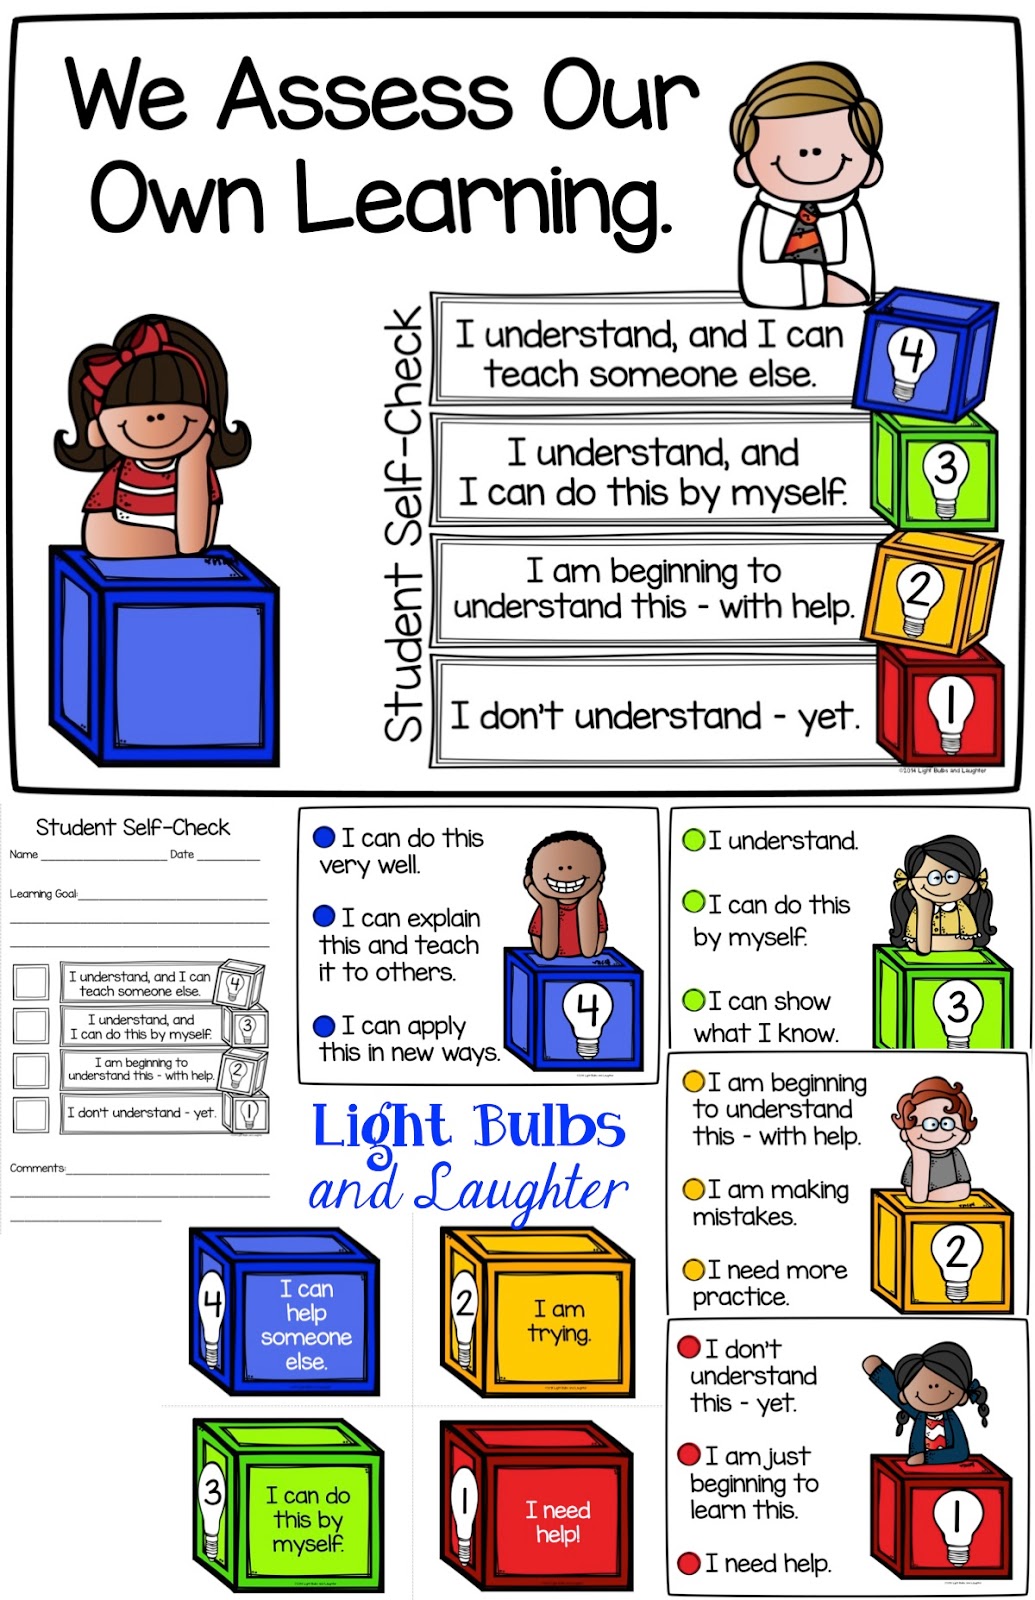 Student Self Assessment Posters - Light Bulbs and Laughter Blog